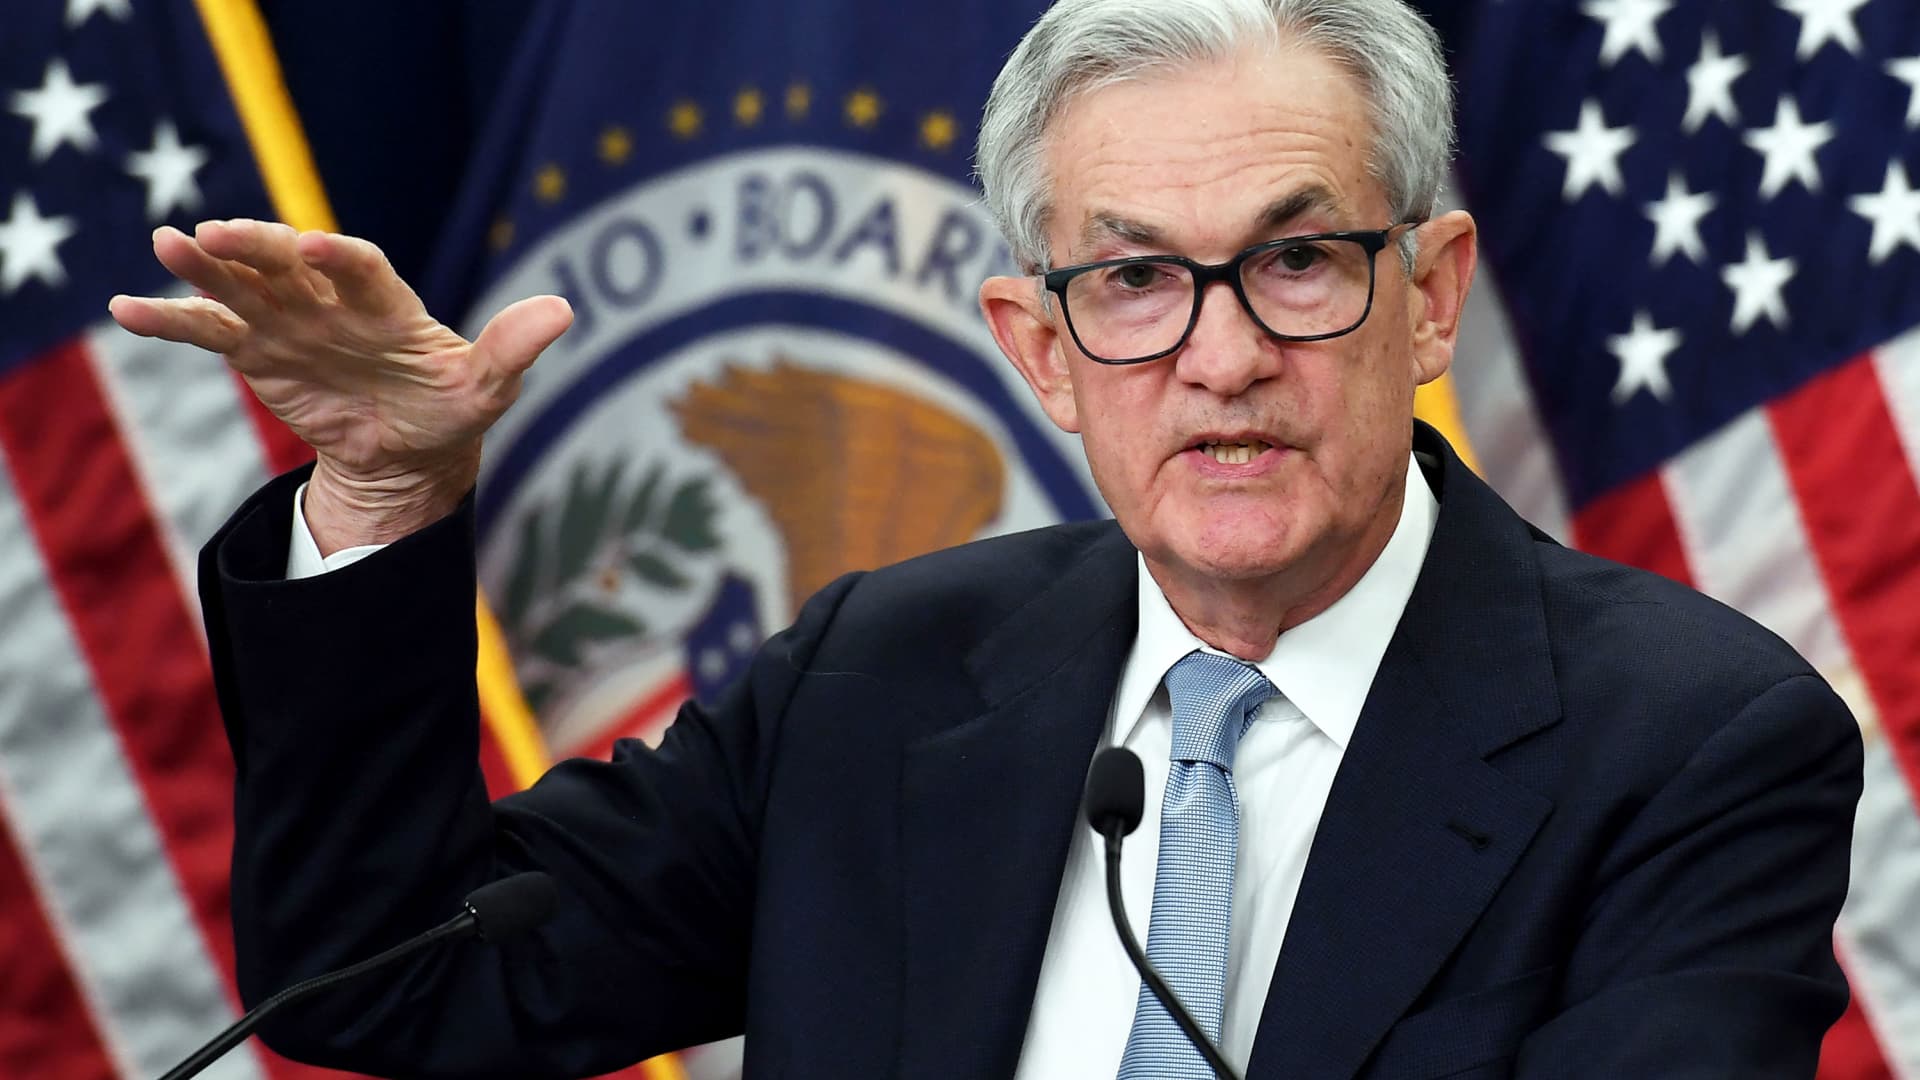 Fed's Powell says SVB collapse may slow the economy through tighter credit